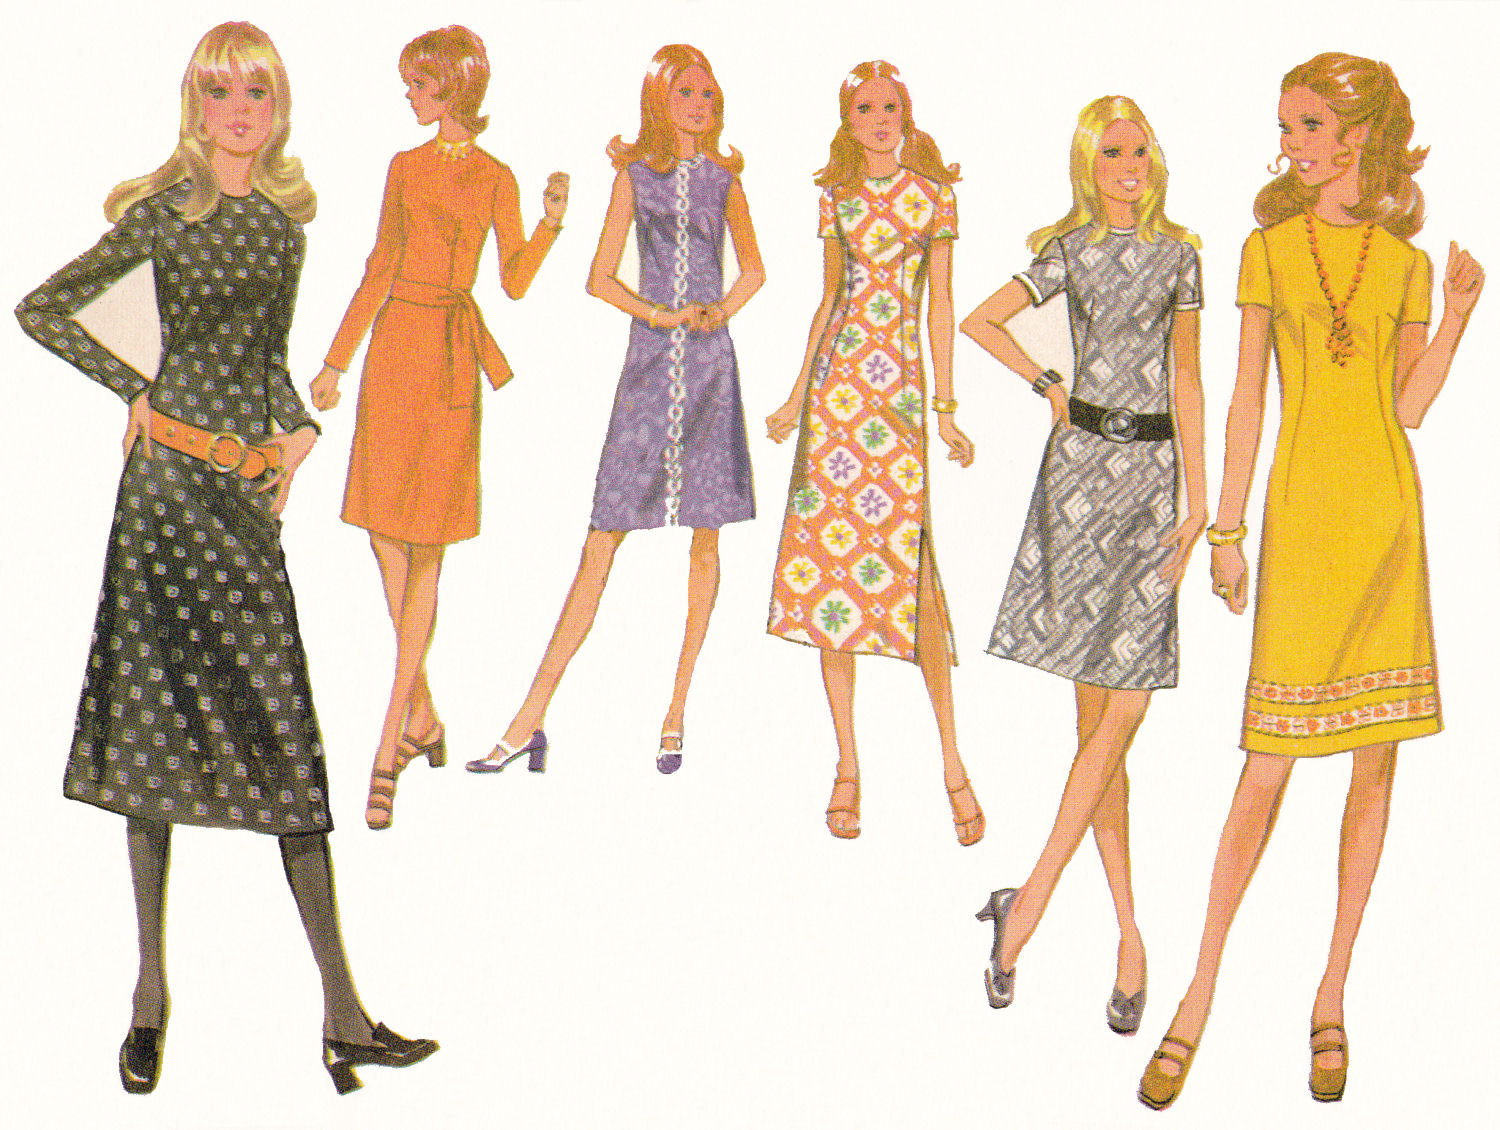 McCall's 2717 Vintage 1971 Retro Slim or A-Line Shift Dress Pattern -  Misses Si - $11.00